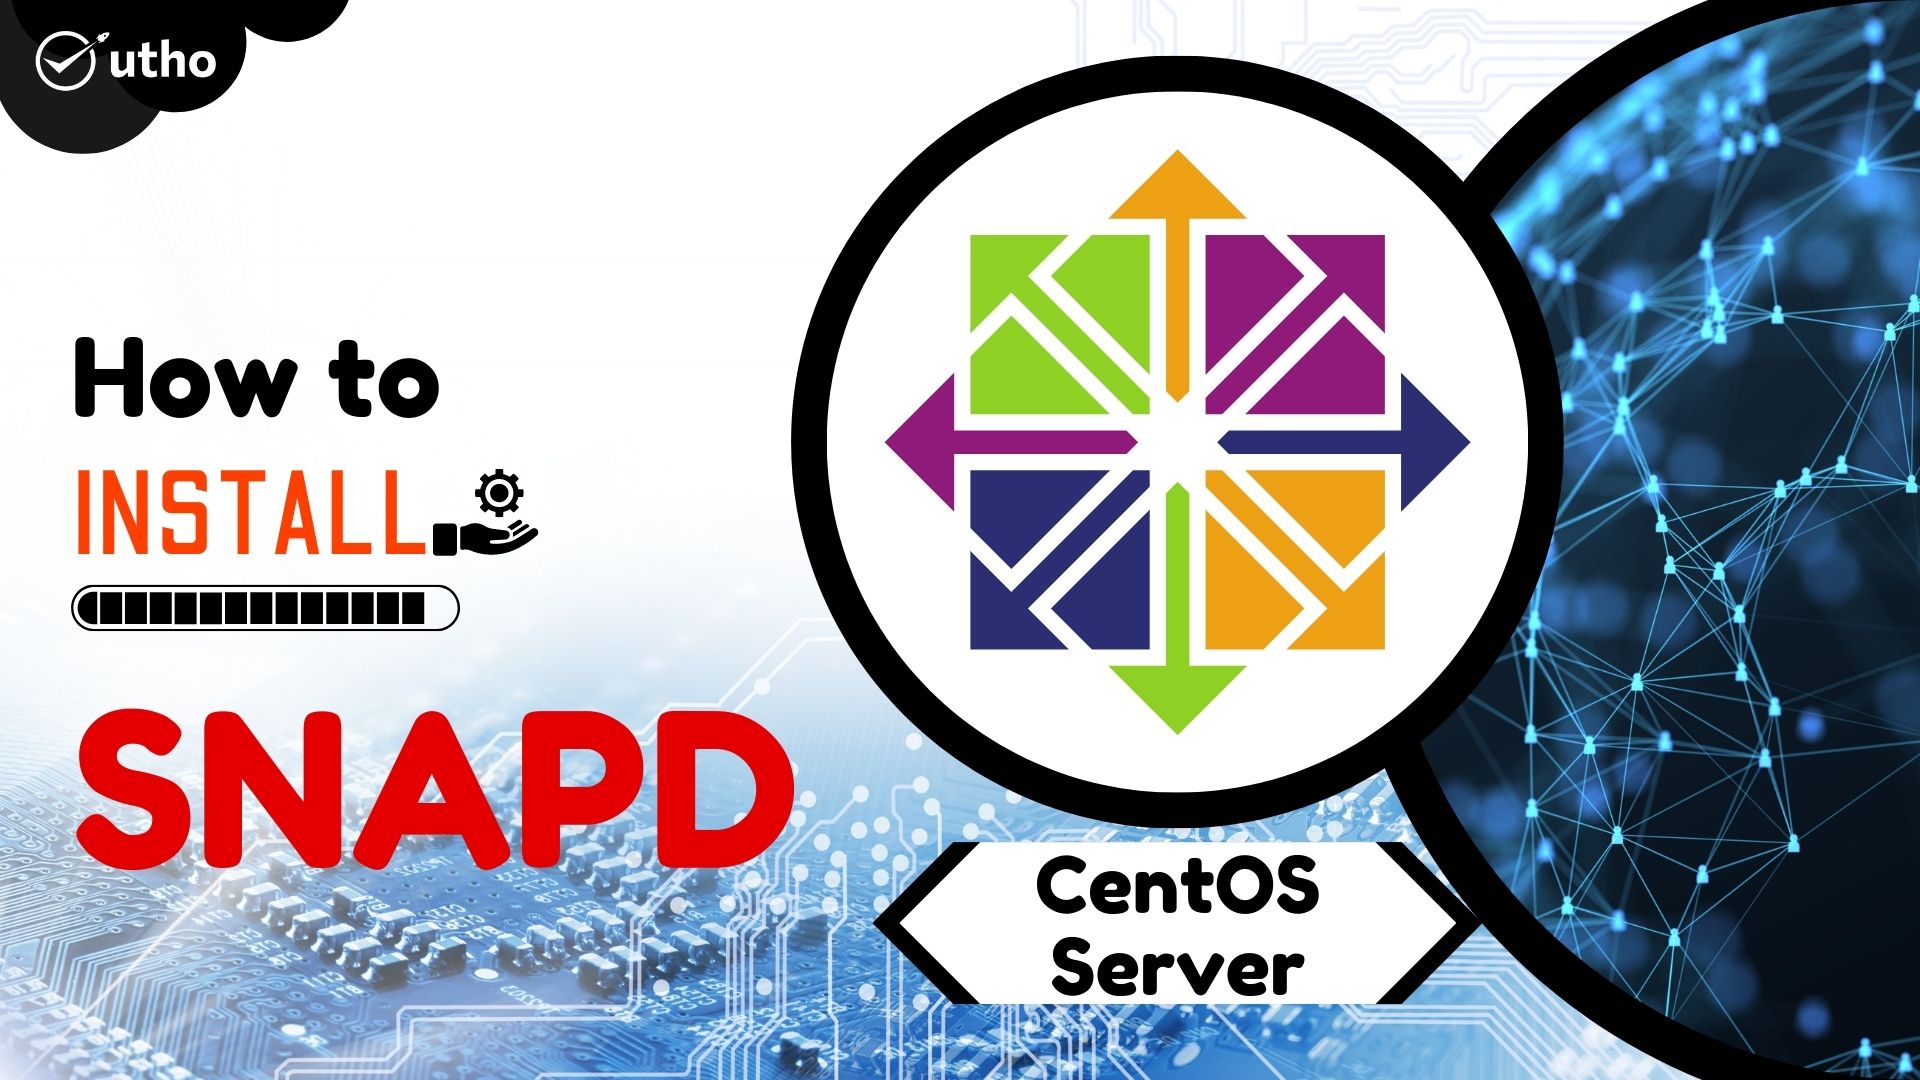 How to install Snapd on CentOS server